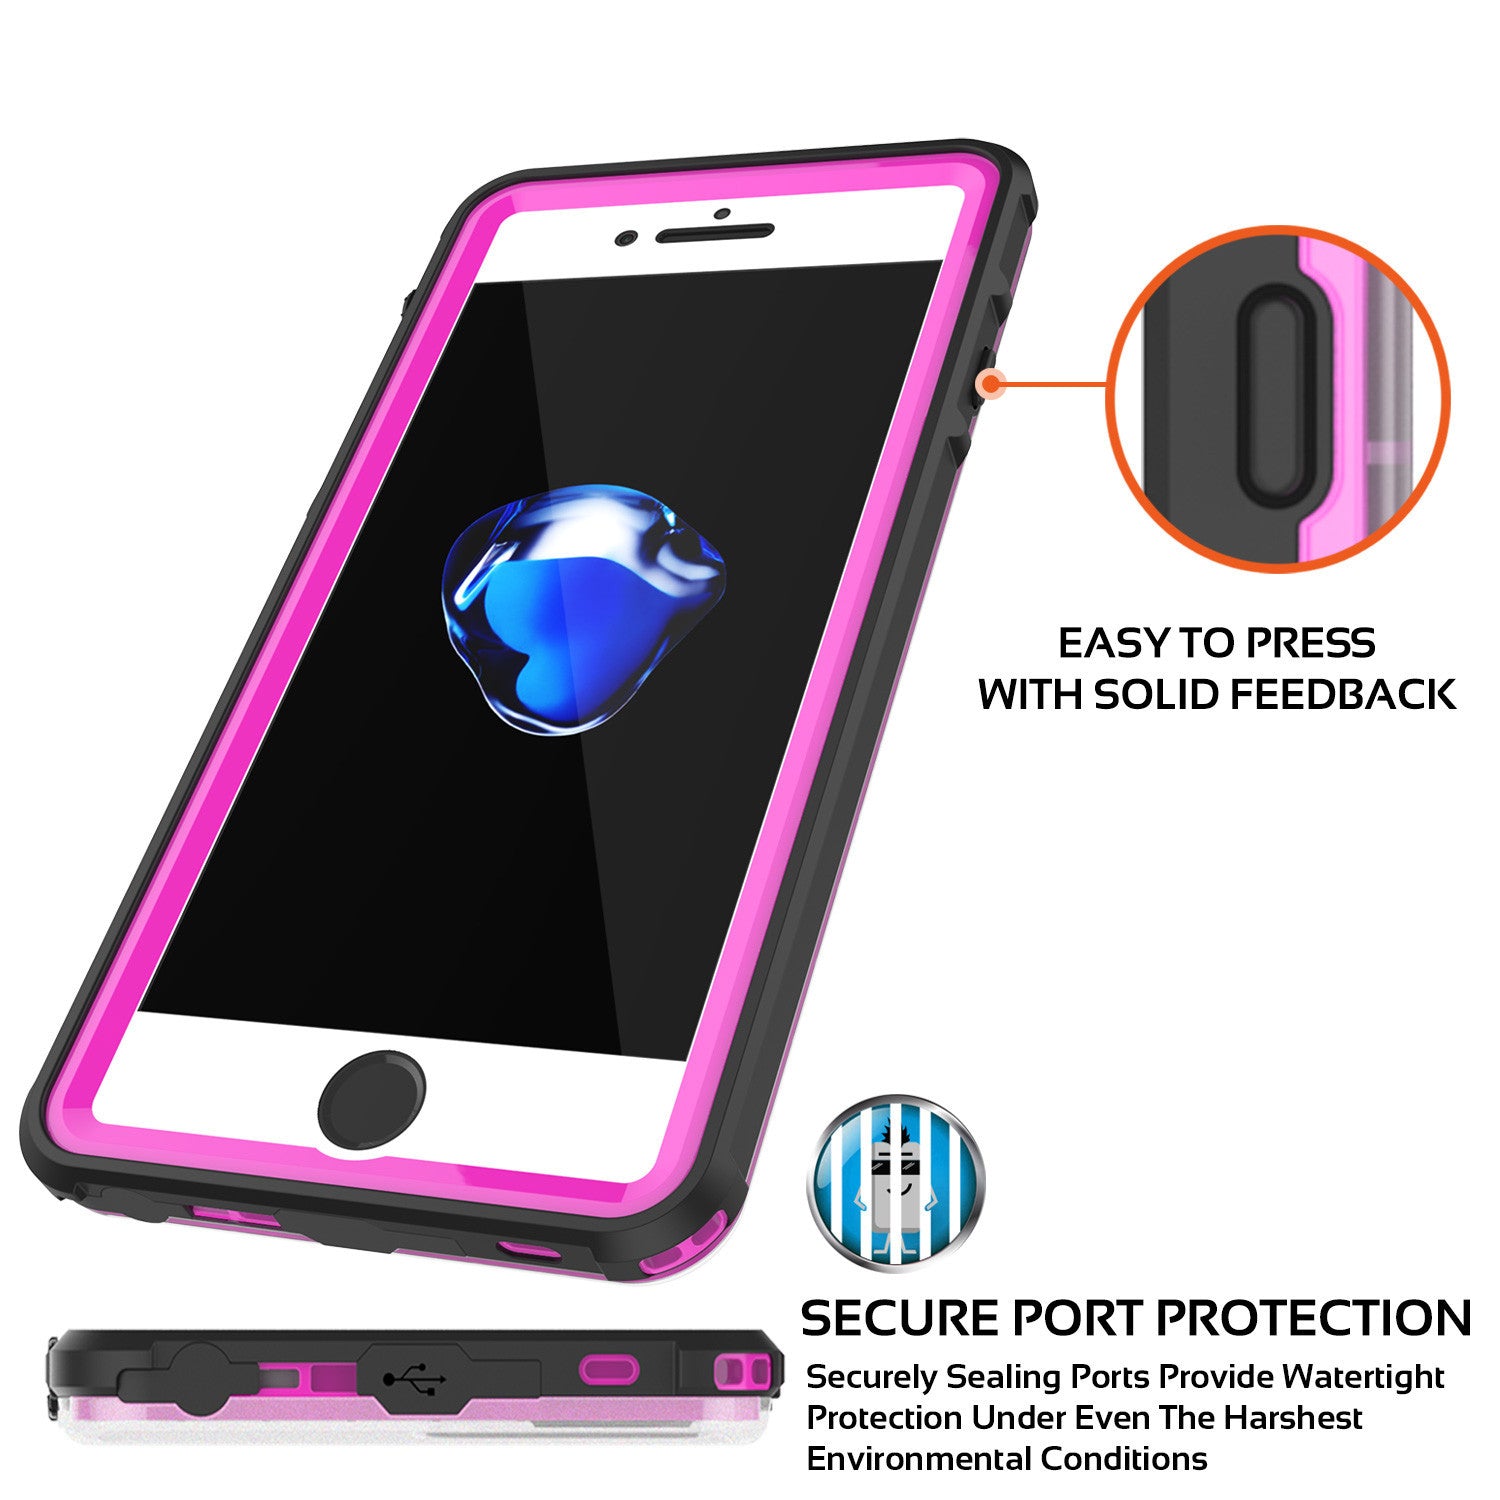 iPhone 7+ Plus Waterproof Case, PUNKcase CRYSTAL Pink W/ Attached Screen Protector | Warranty